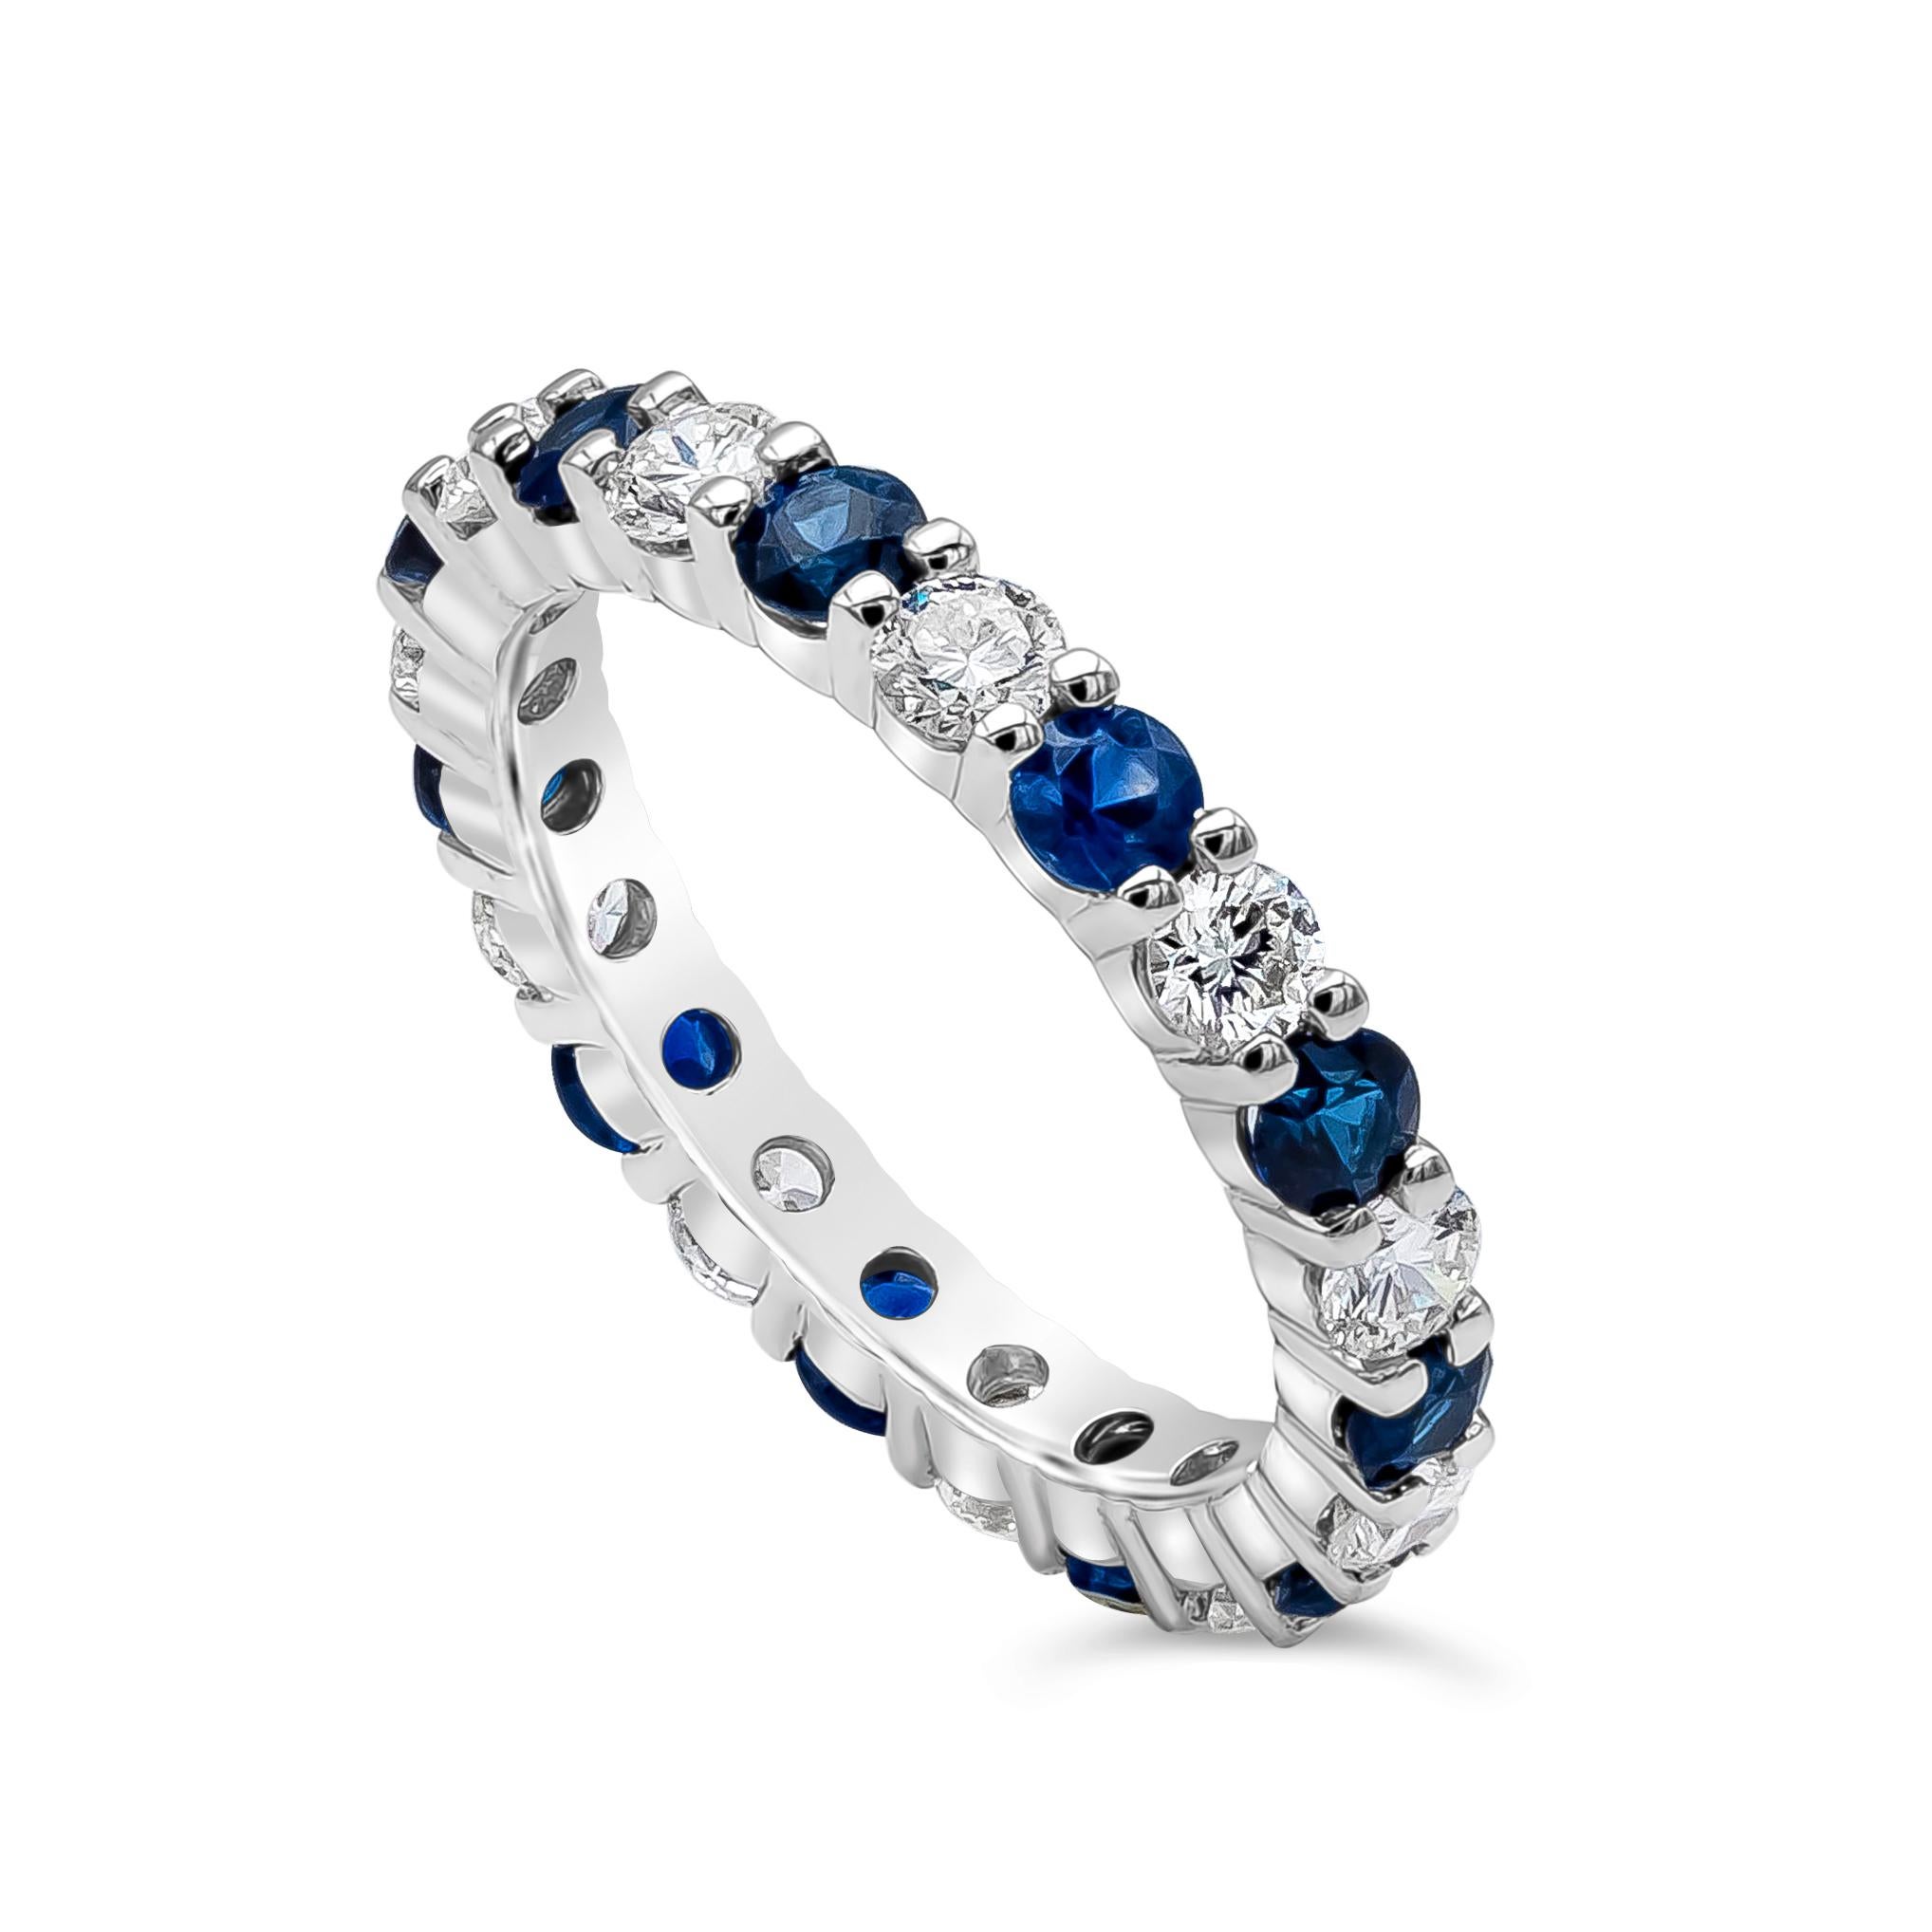 This sophisticated eternity wedding band features gleaming brilliant round diamonds alternating with blue sapphire. An infinite row of round elegant alternating sapphire weighs 0.94 carats and the brilliant round diamonds weighs 0.85 carats, H in